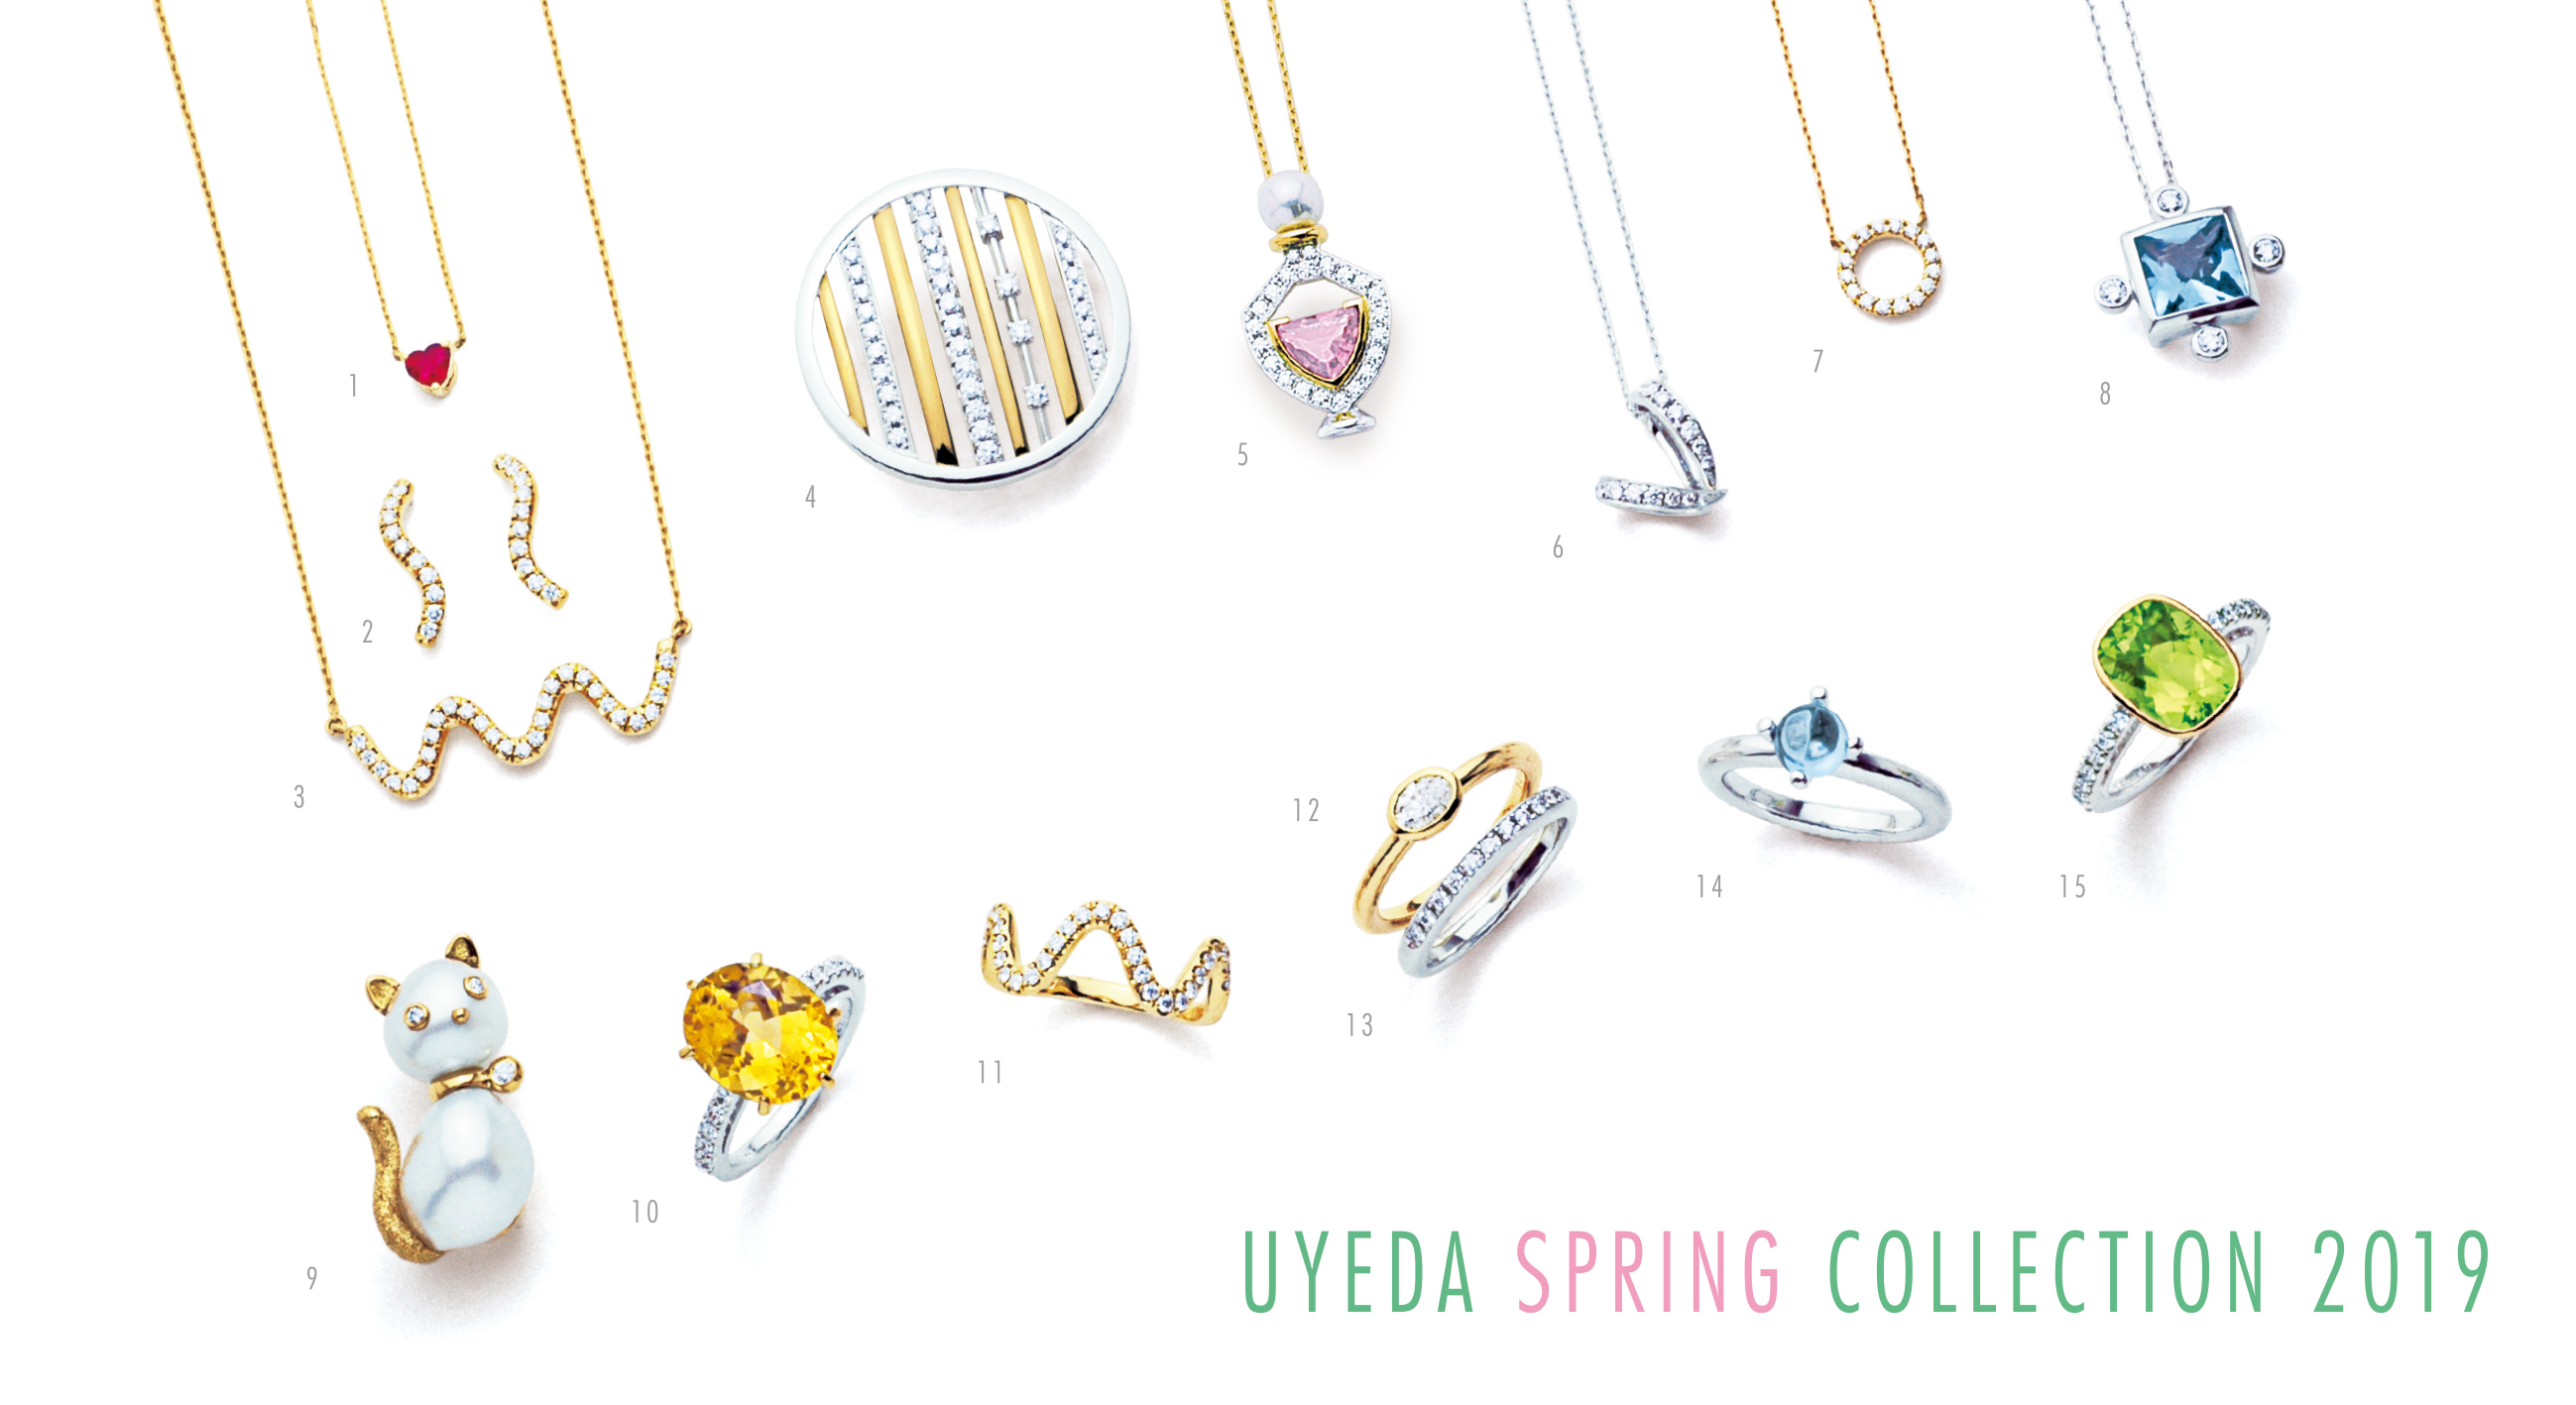 UYEDA SPRING COLLECTION 2019